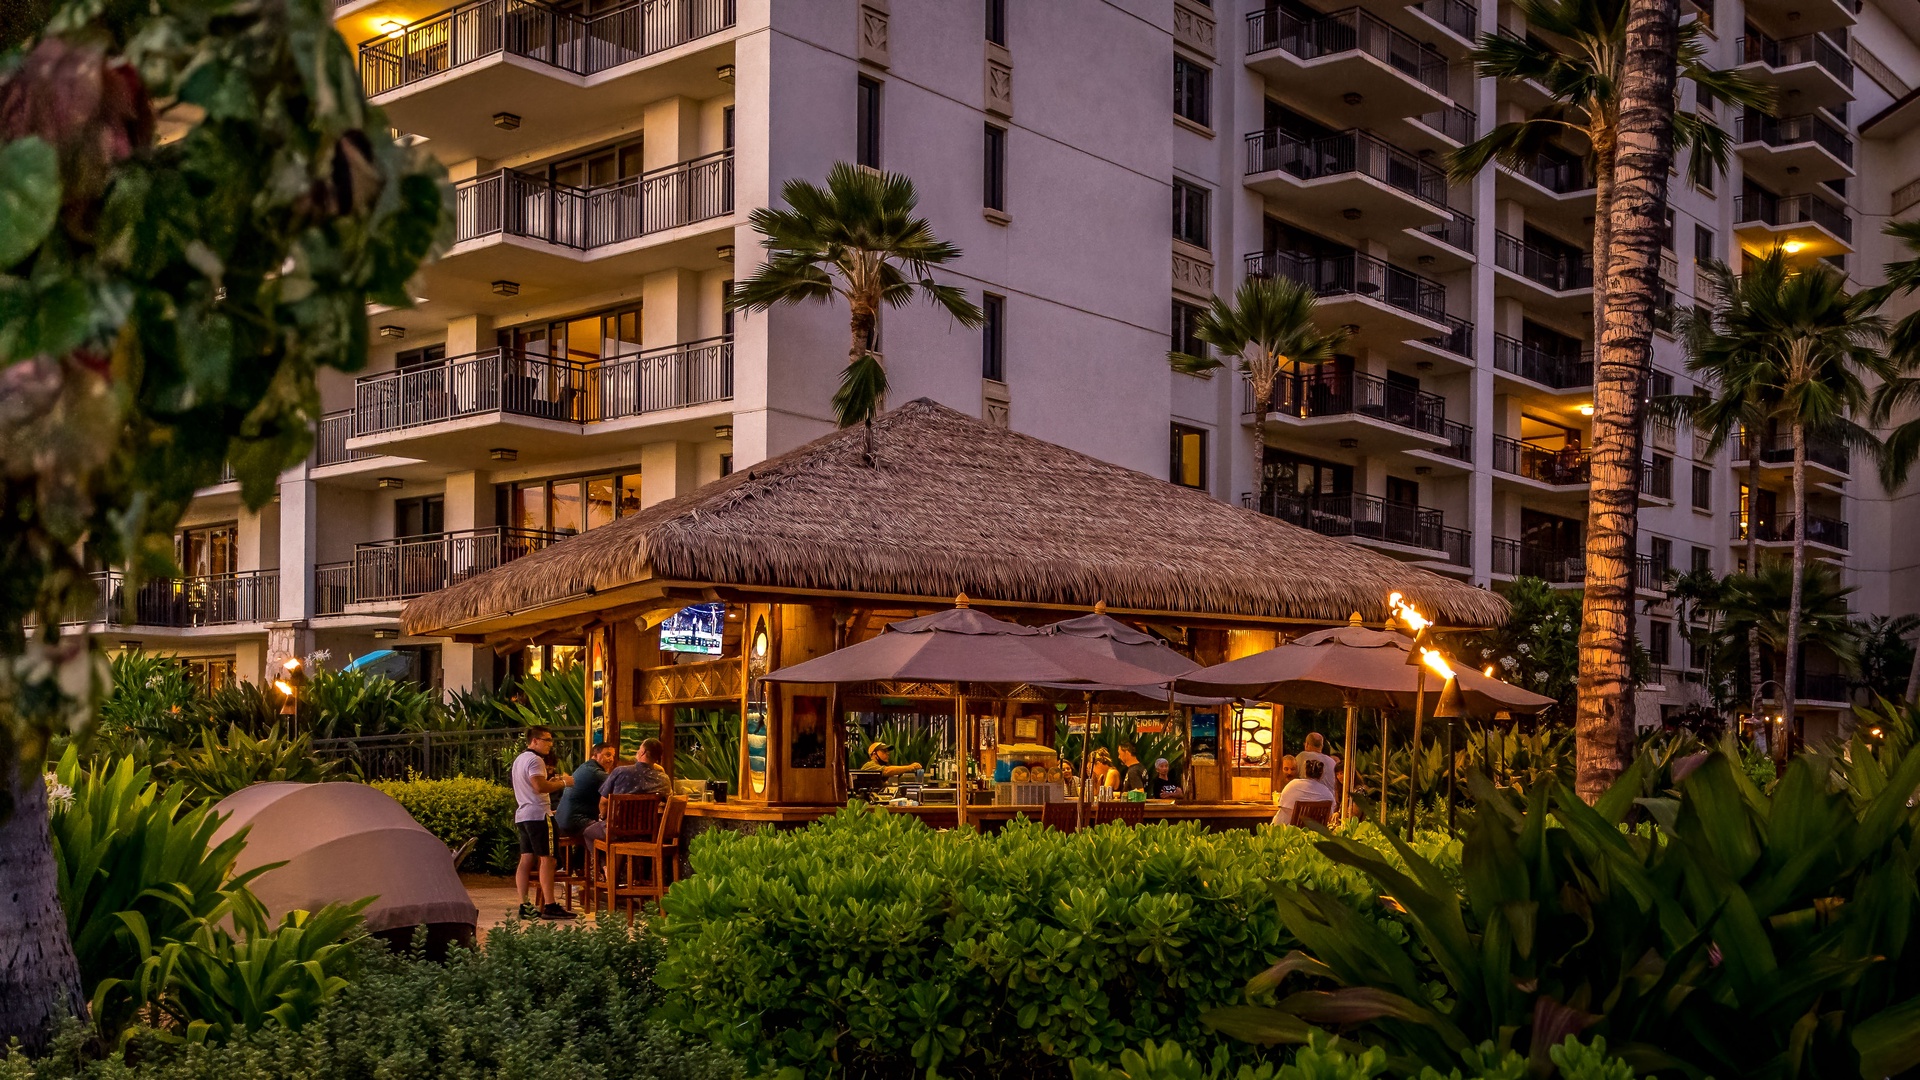 Kapolei Vacation Rentals, Ko Olina Beach Villas B202 - Have a drink at the tropical bar near the beach and enjoy your stay.